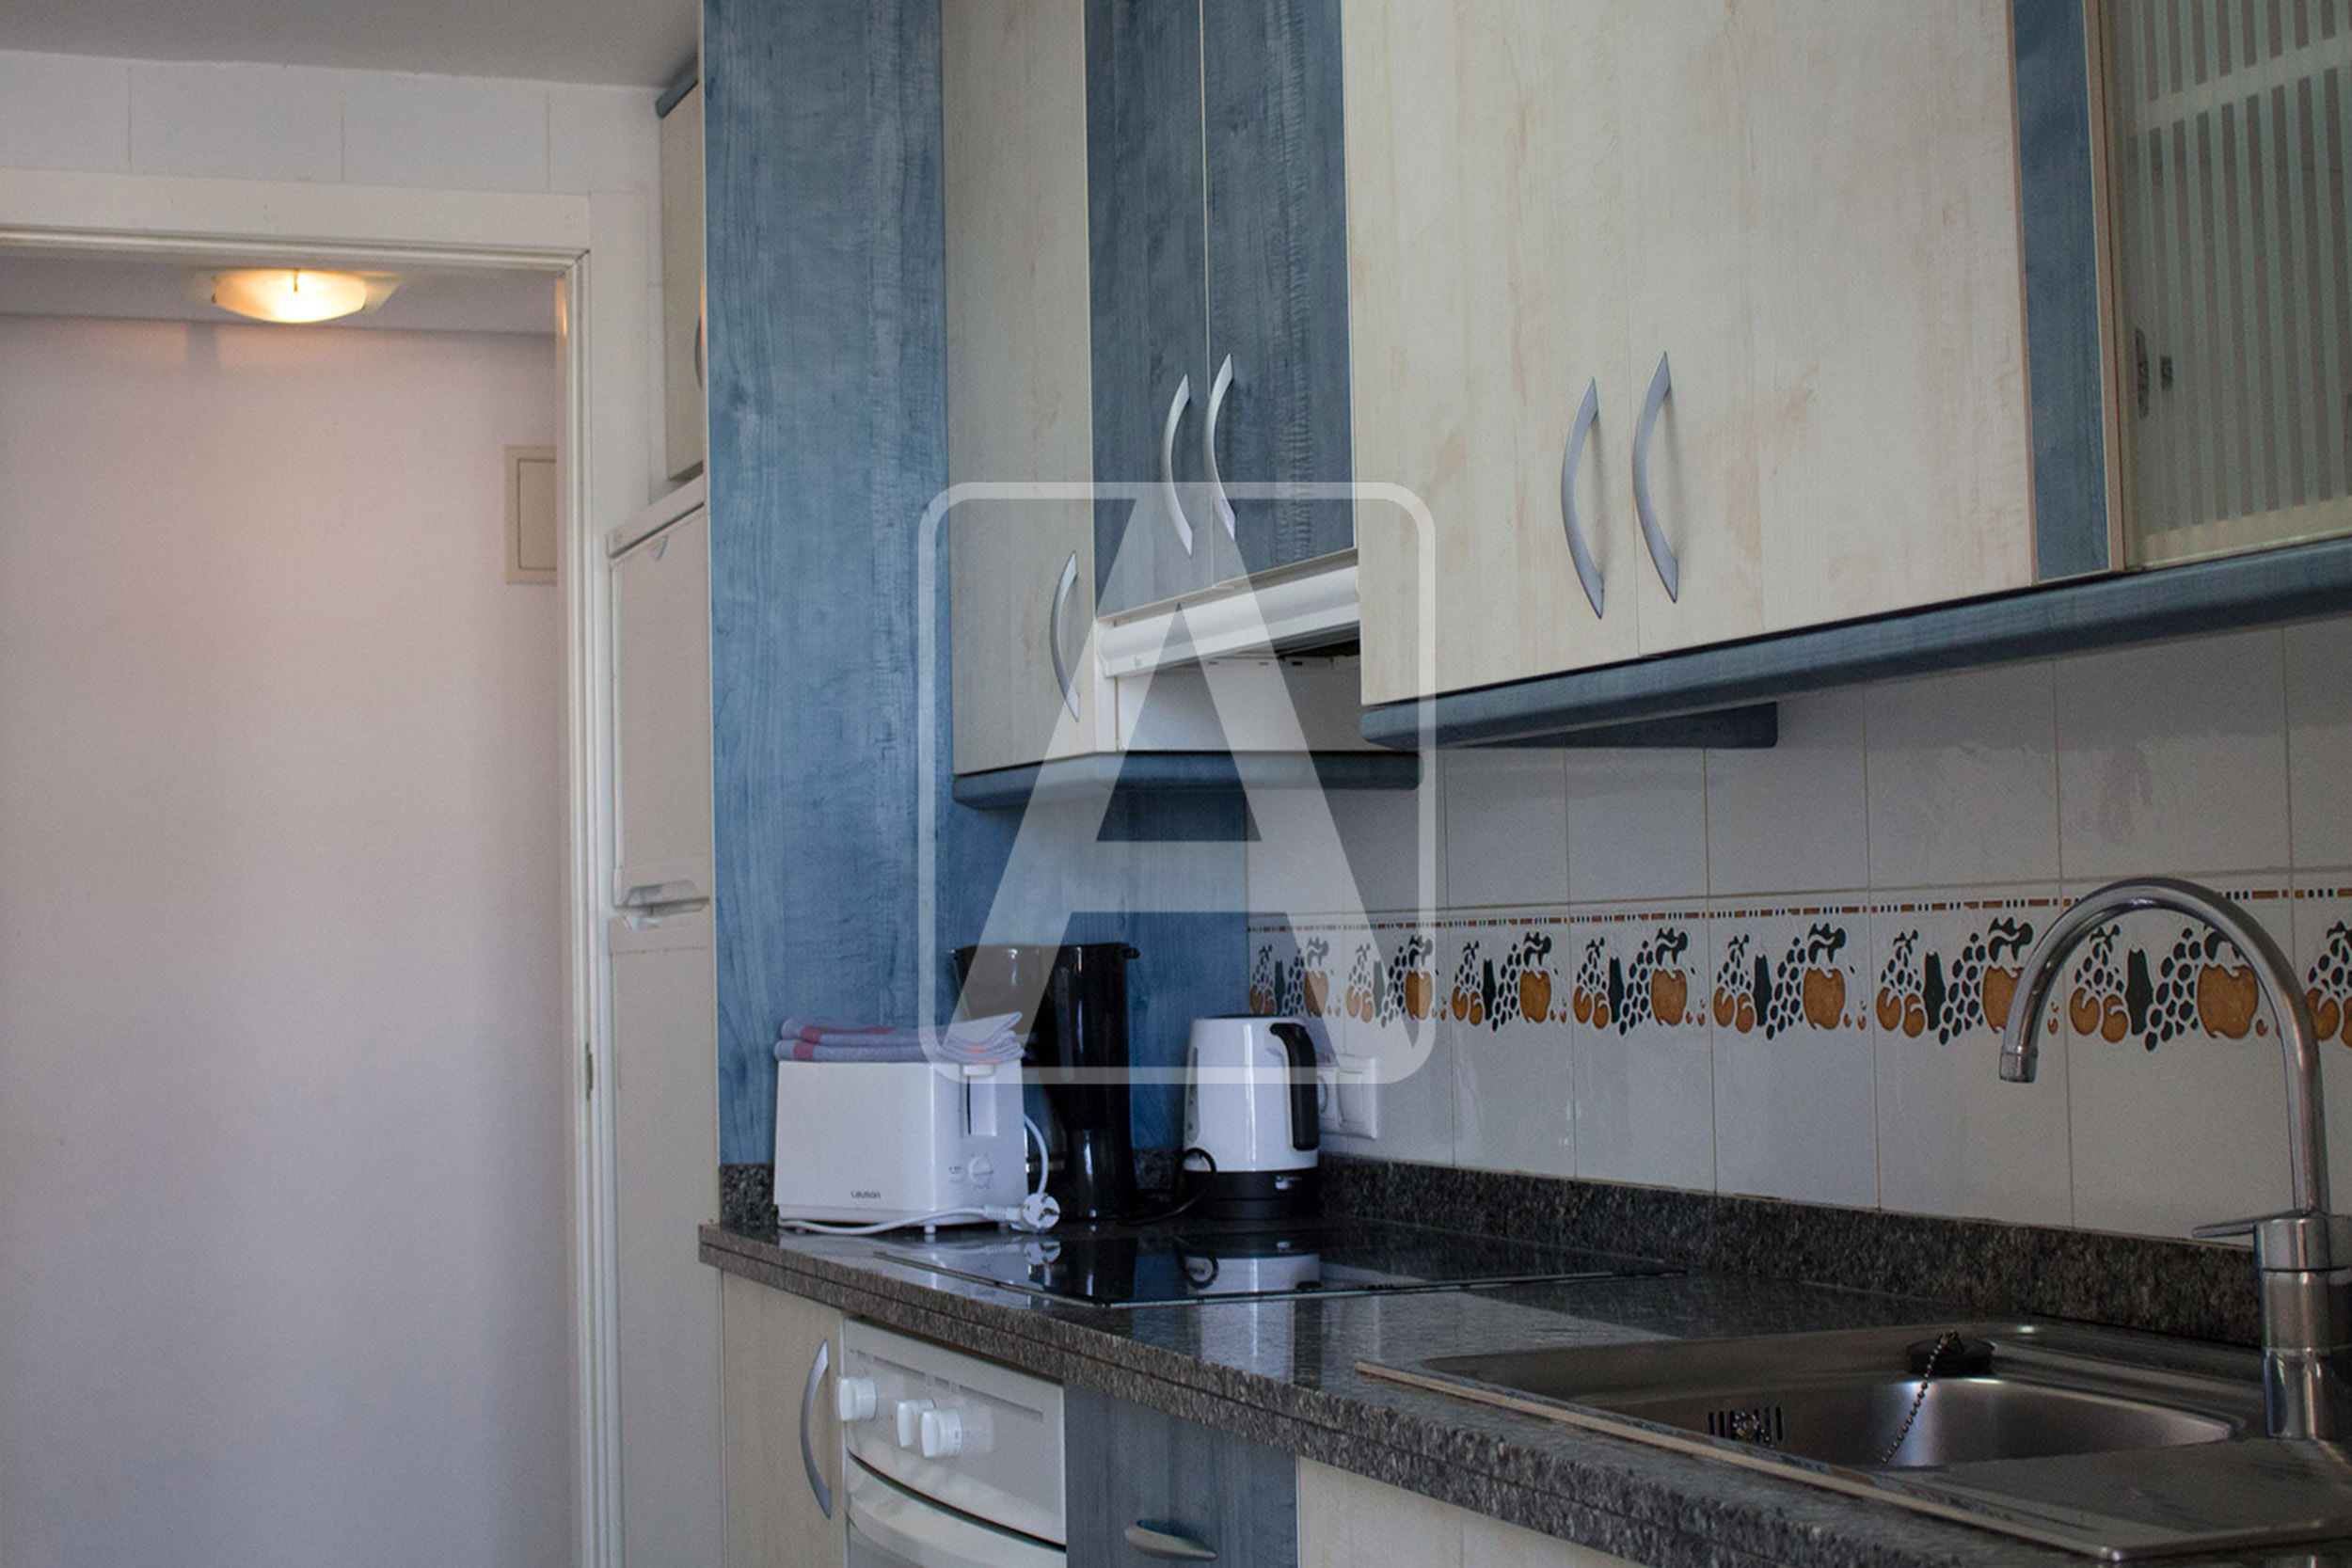 Apartment for sale in Calpe 6